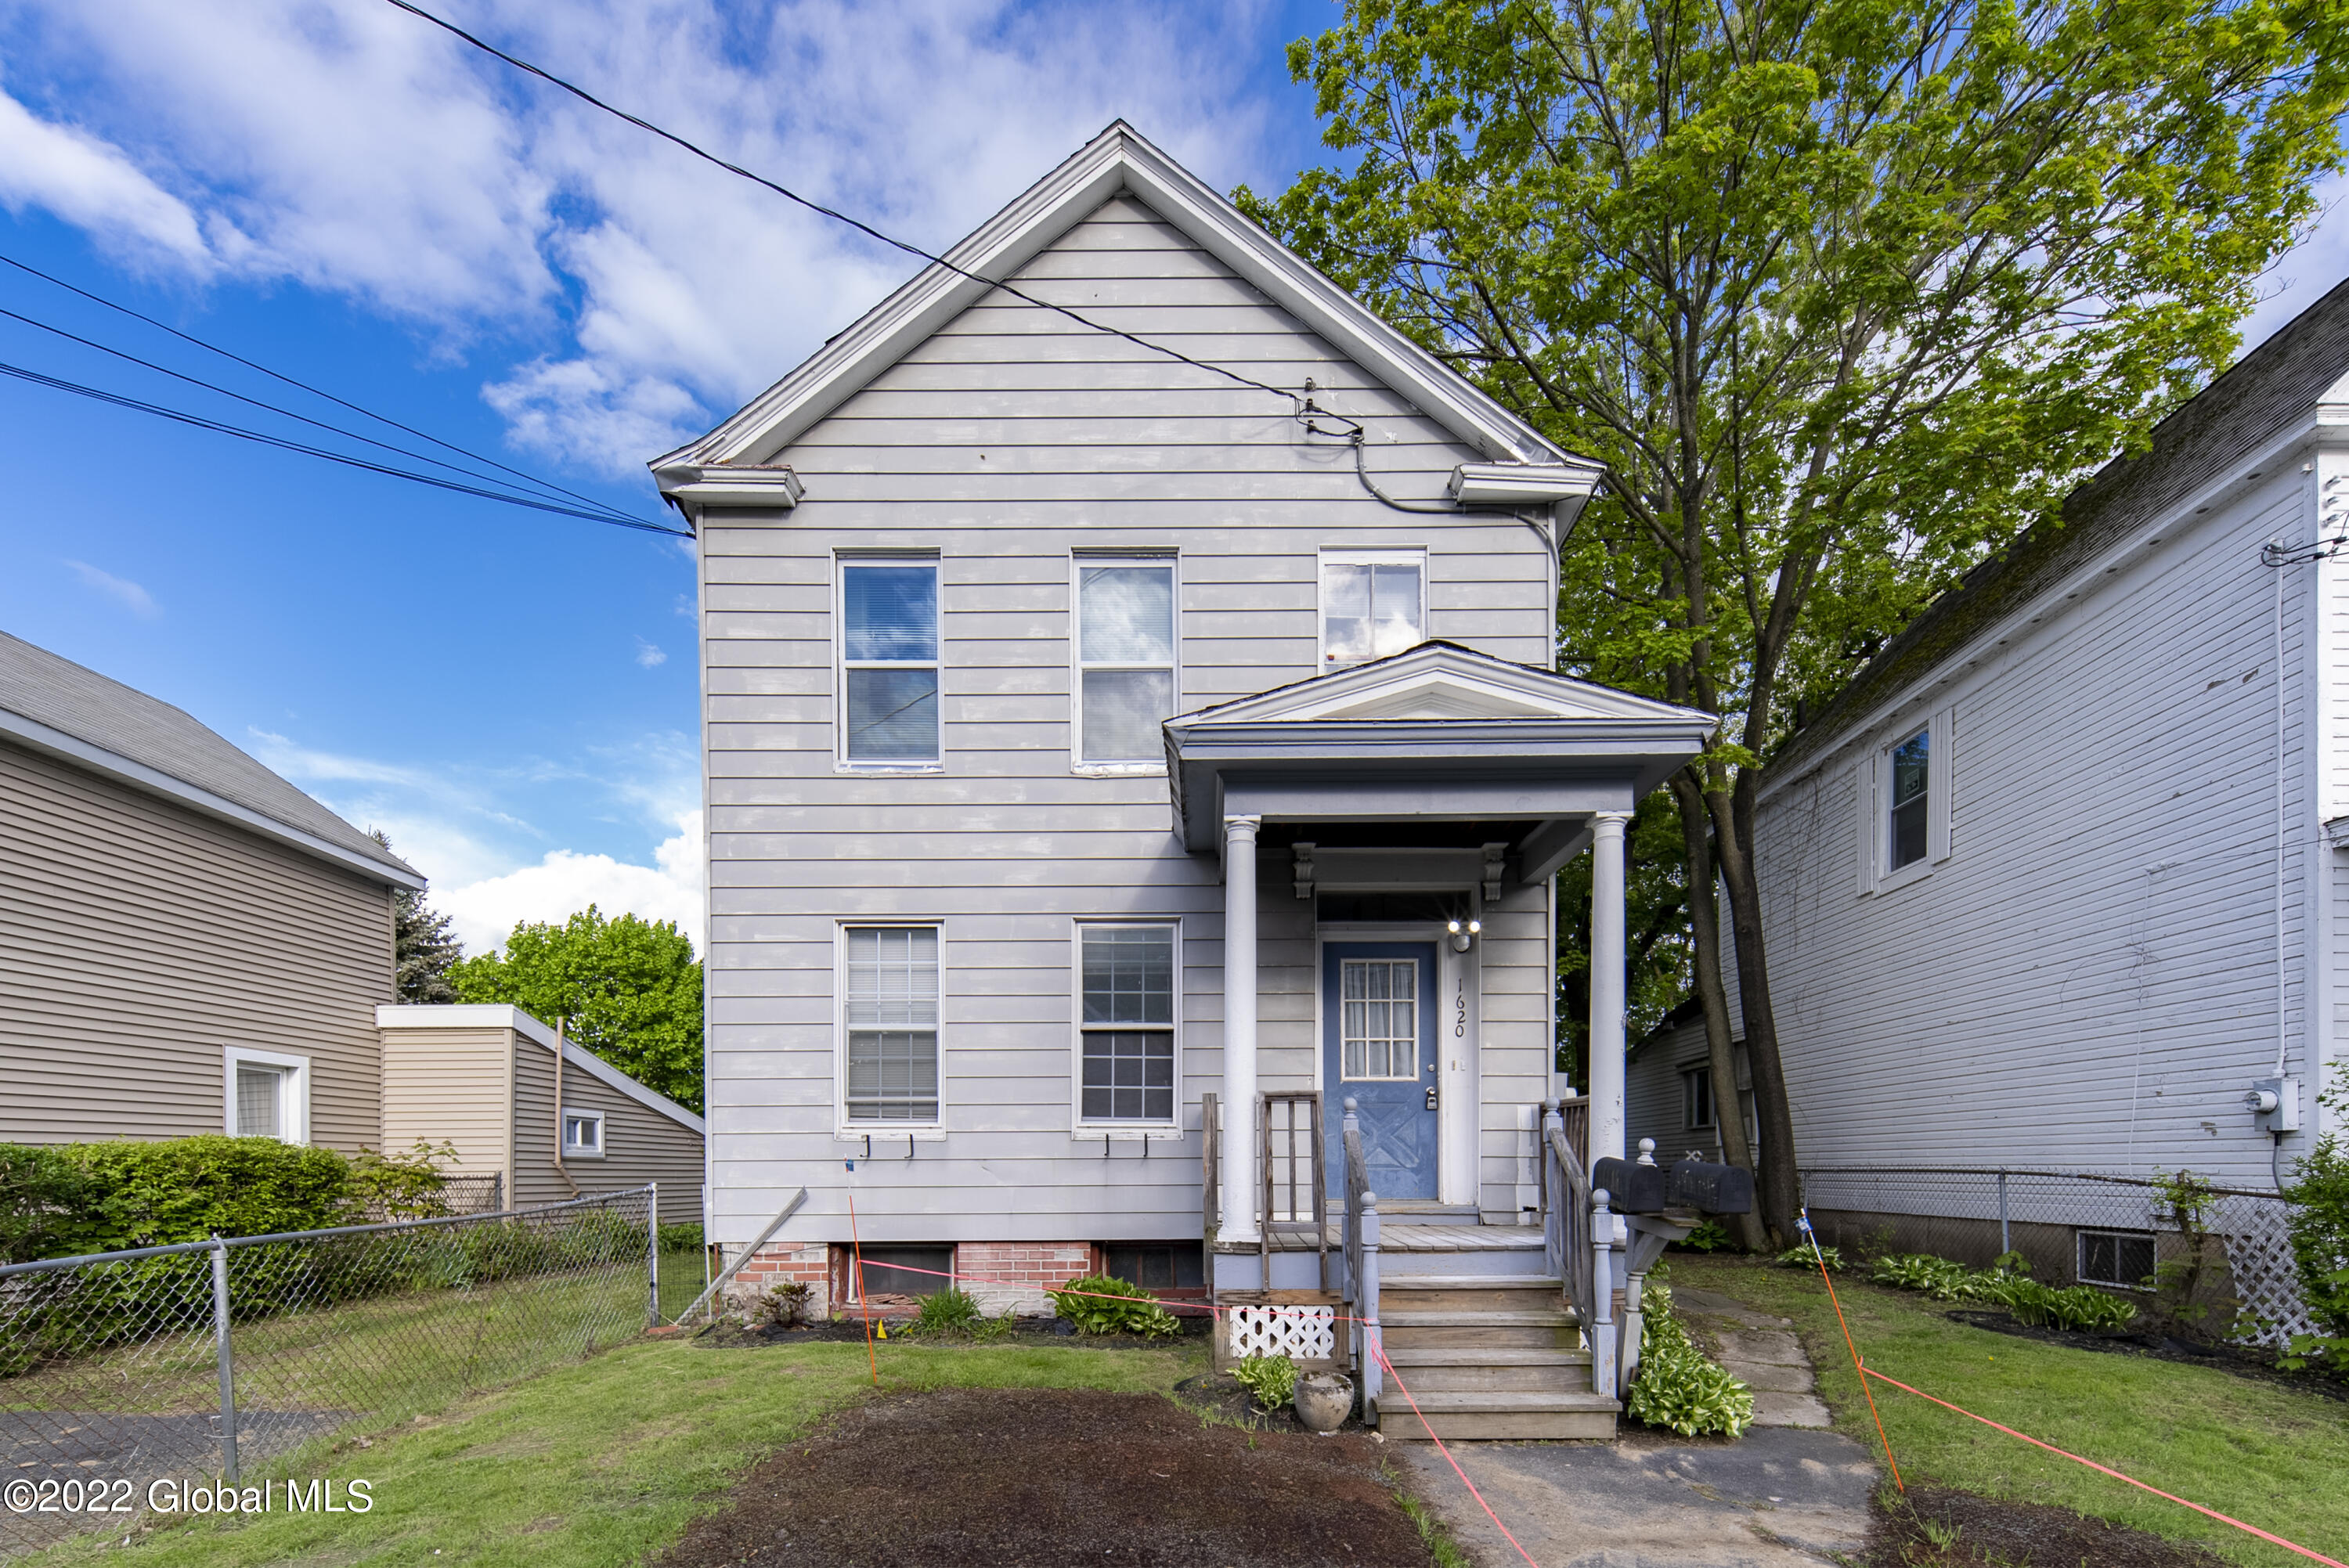 1620 5th St -Unit 1 Rensselaer, NY 12144